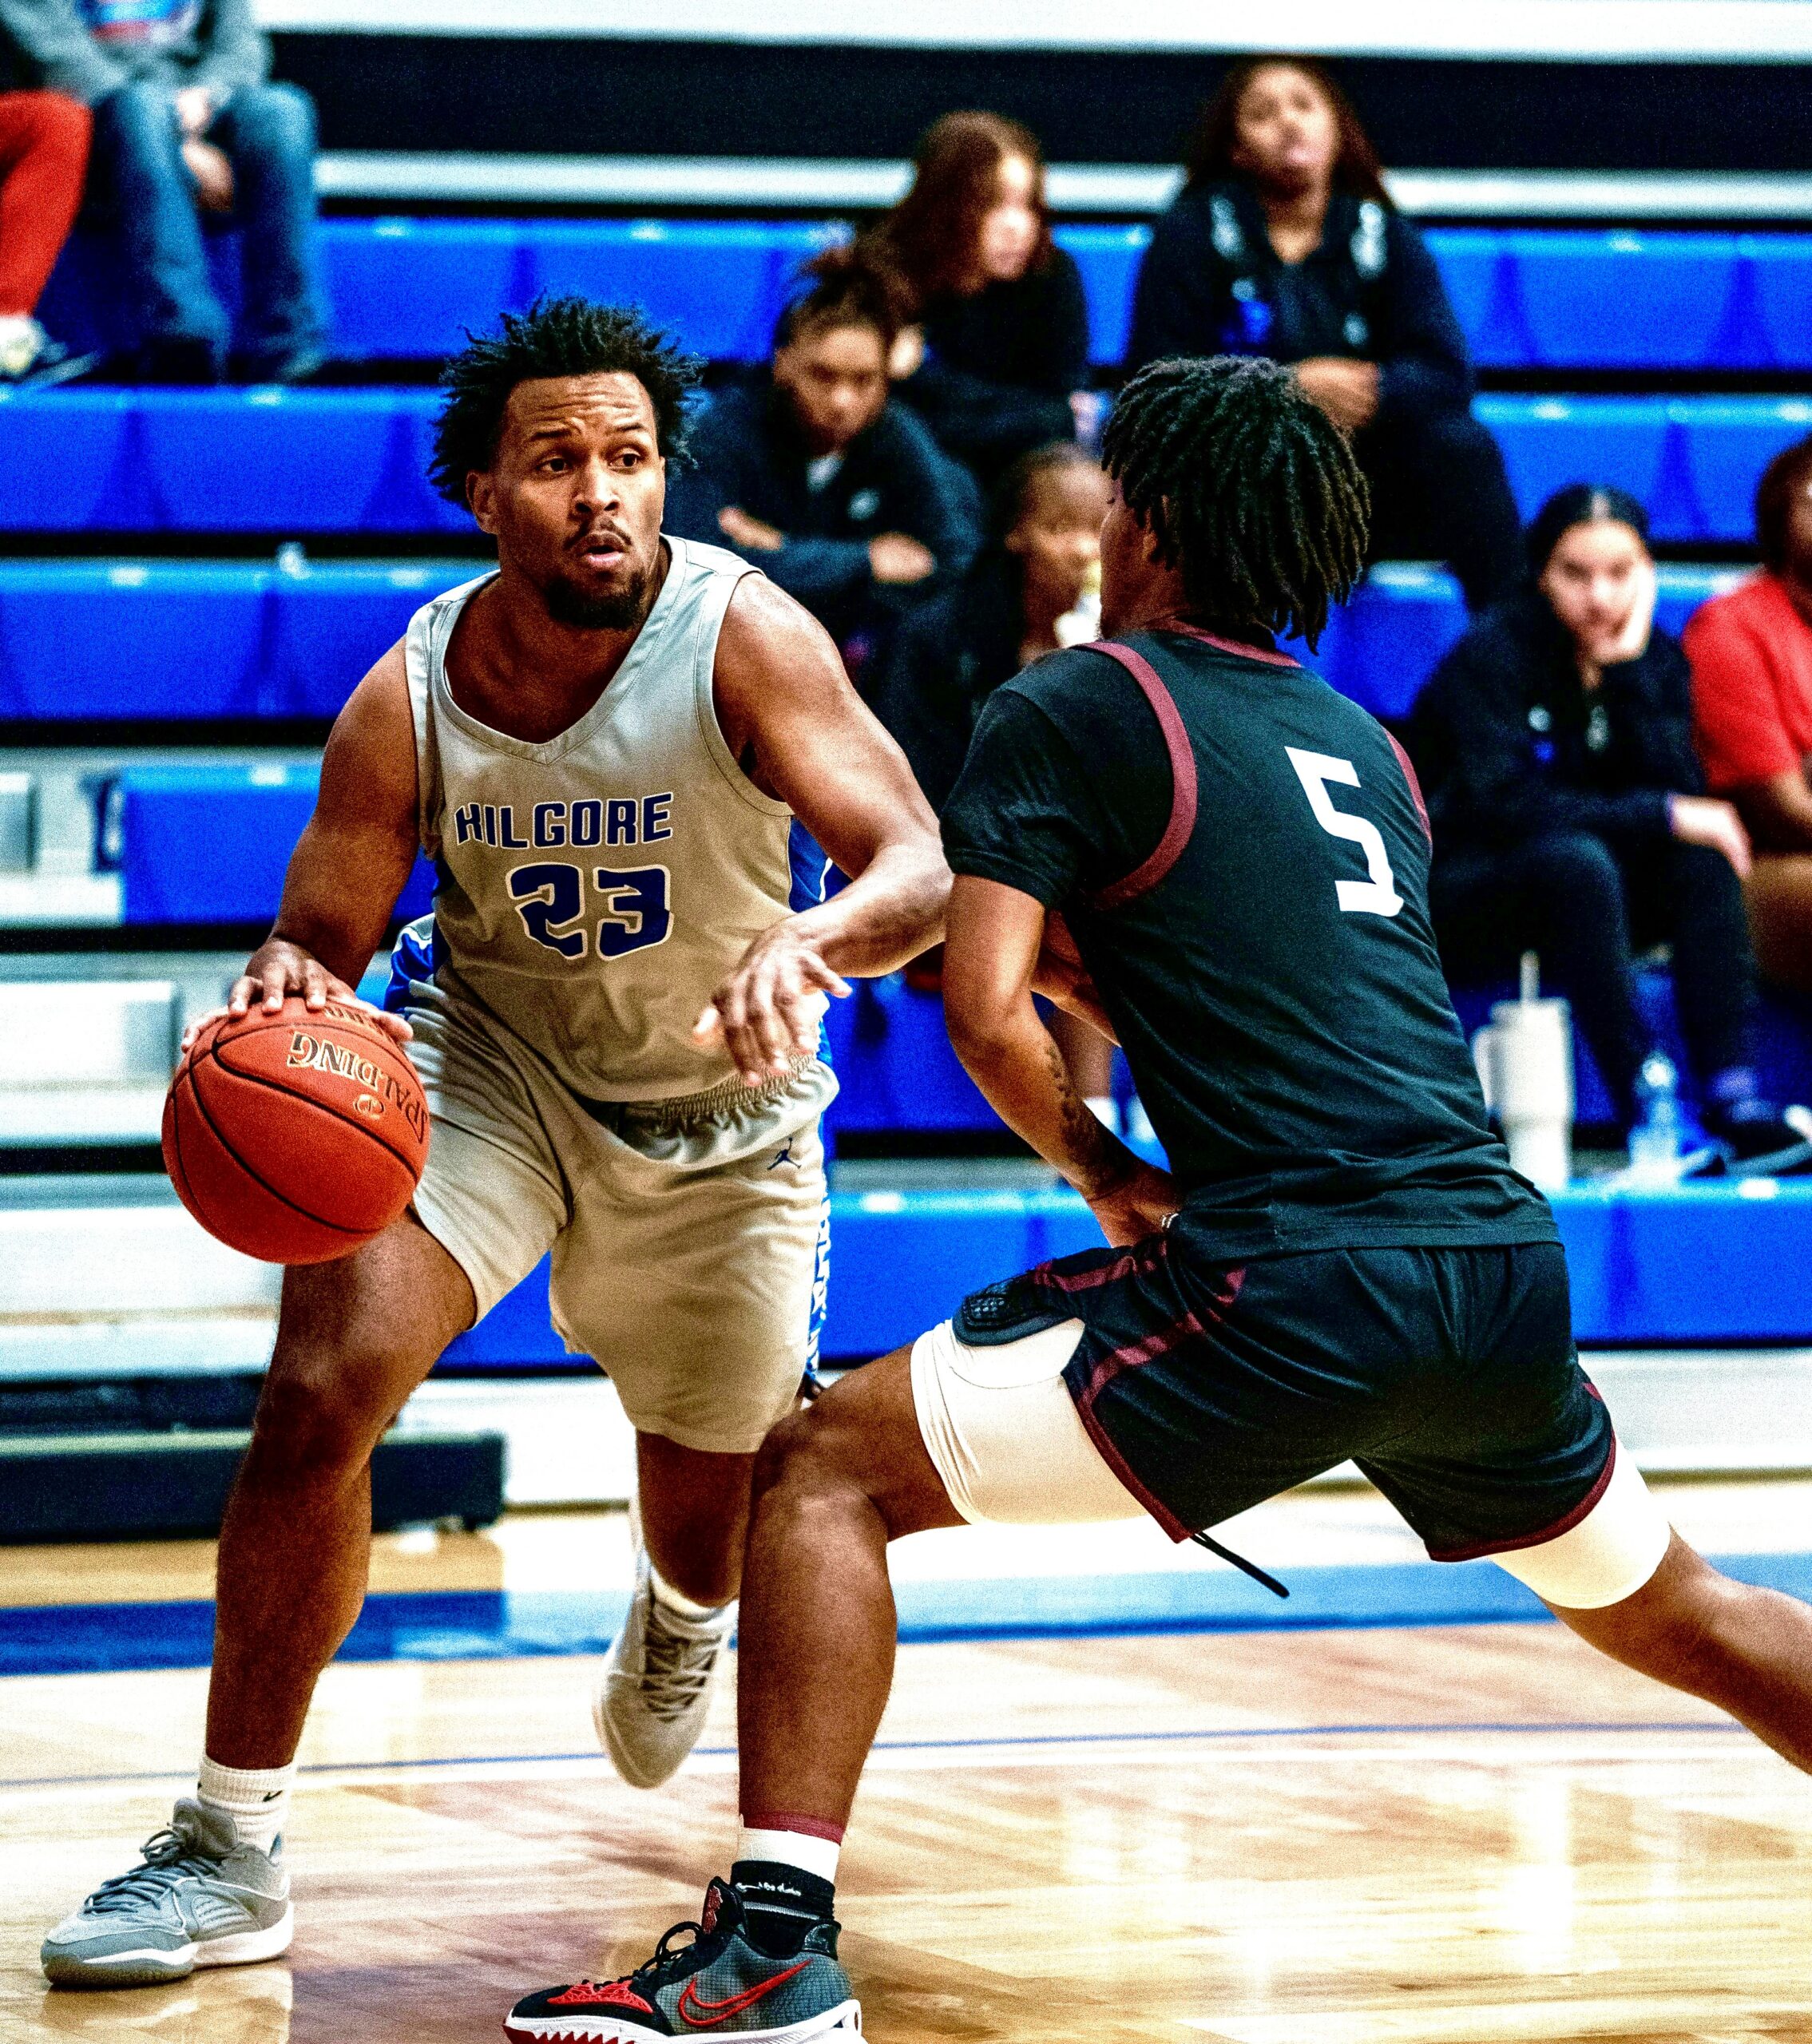 Kilgore College's Willie Williams had 20 points and 13 rebounds in a 65-53 win over Blinn in the Region XIV Conference Men's Basketball Tournament at Tyler Junior College on Thursday afternoon. Williams is pictured here in this file photo in a home game at Masters Gymnasium earlier this season. The Rangers (24-8) join the Lady Rangers in the semifinal round: the Lady Rangers will face Trinity Valley on Friday at 3 p.m., and the Rangers will play Lee College on Friday at 6 p.m. (File photo by ALEX NABOR - ETBLITZ.COM)